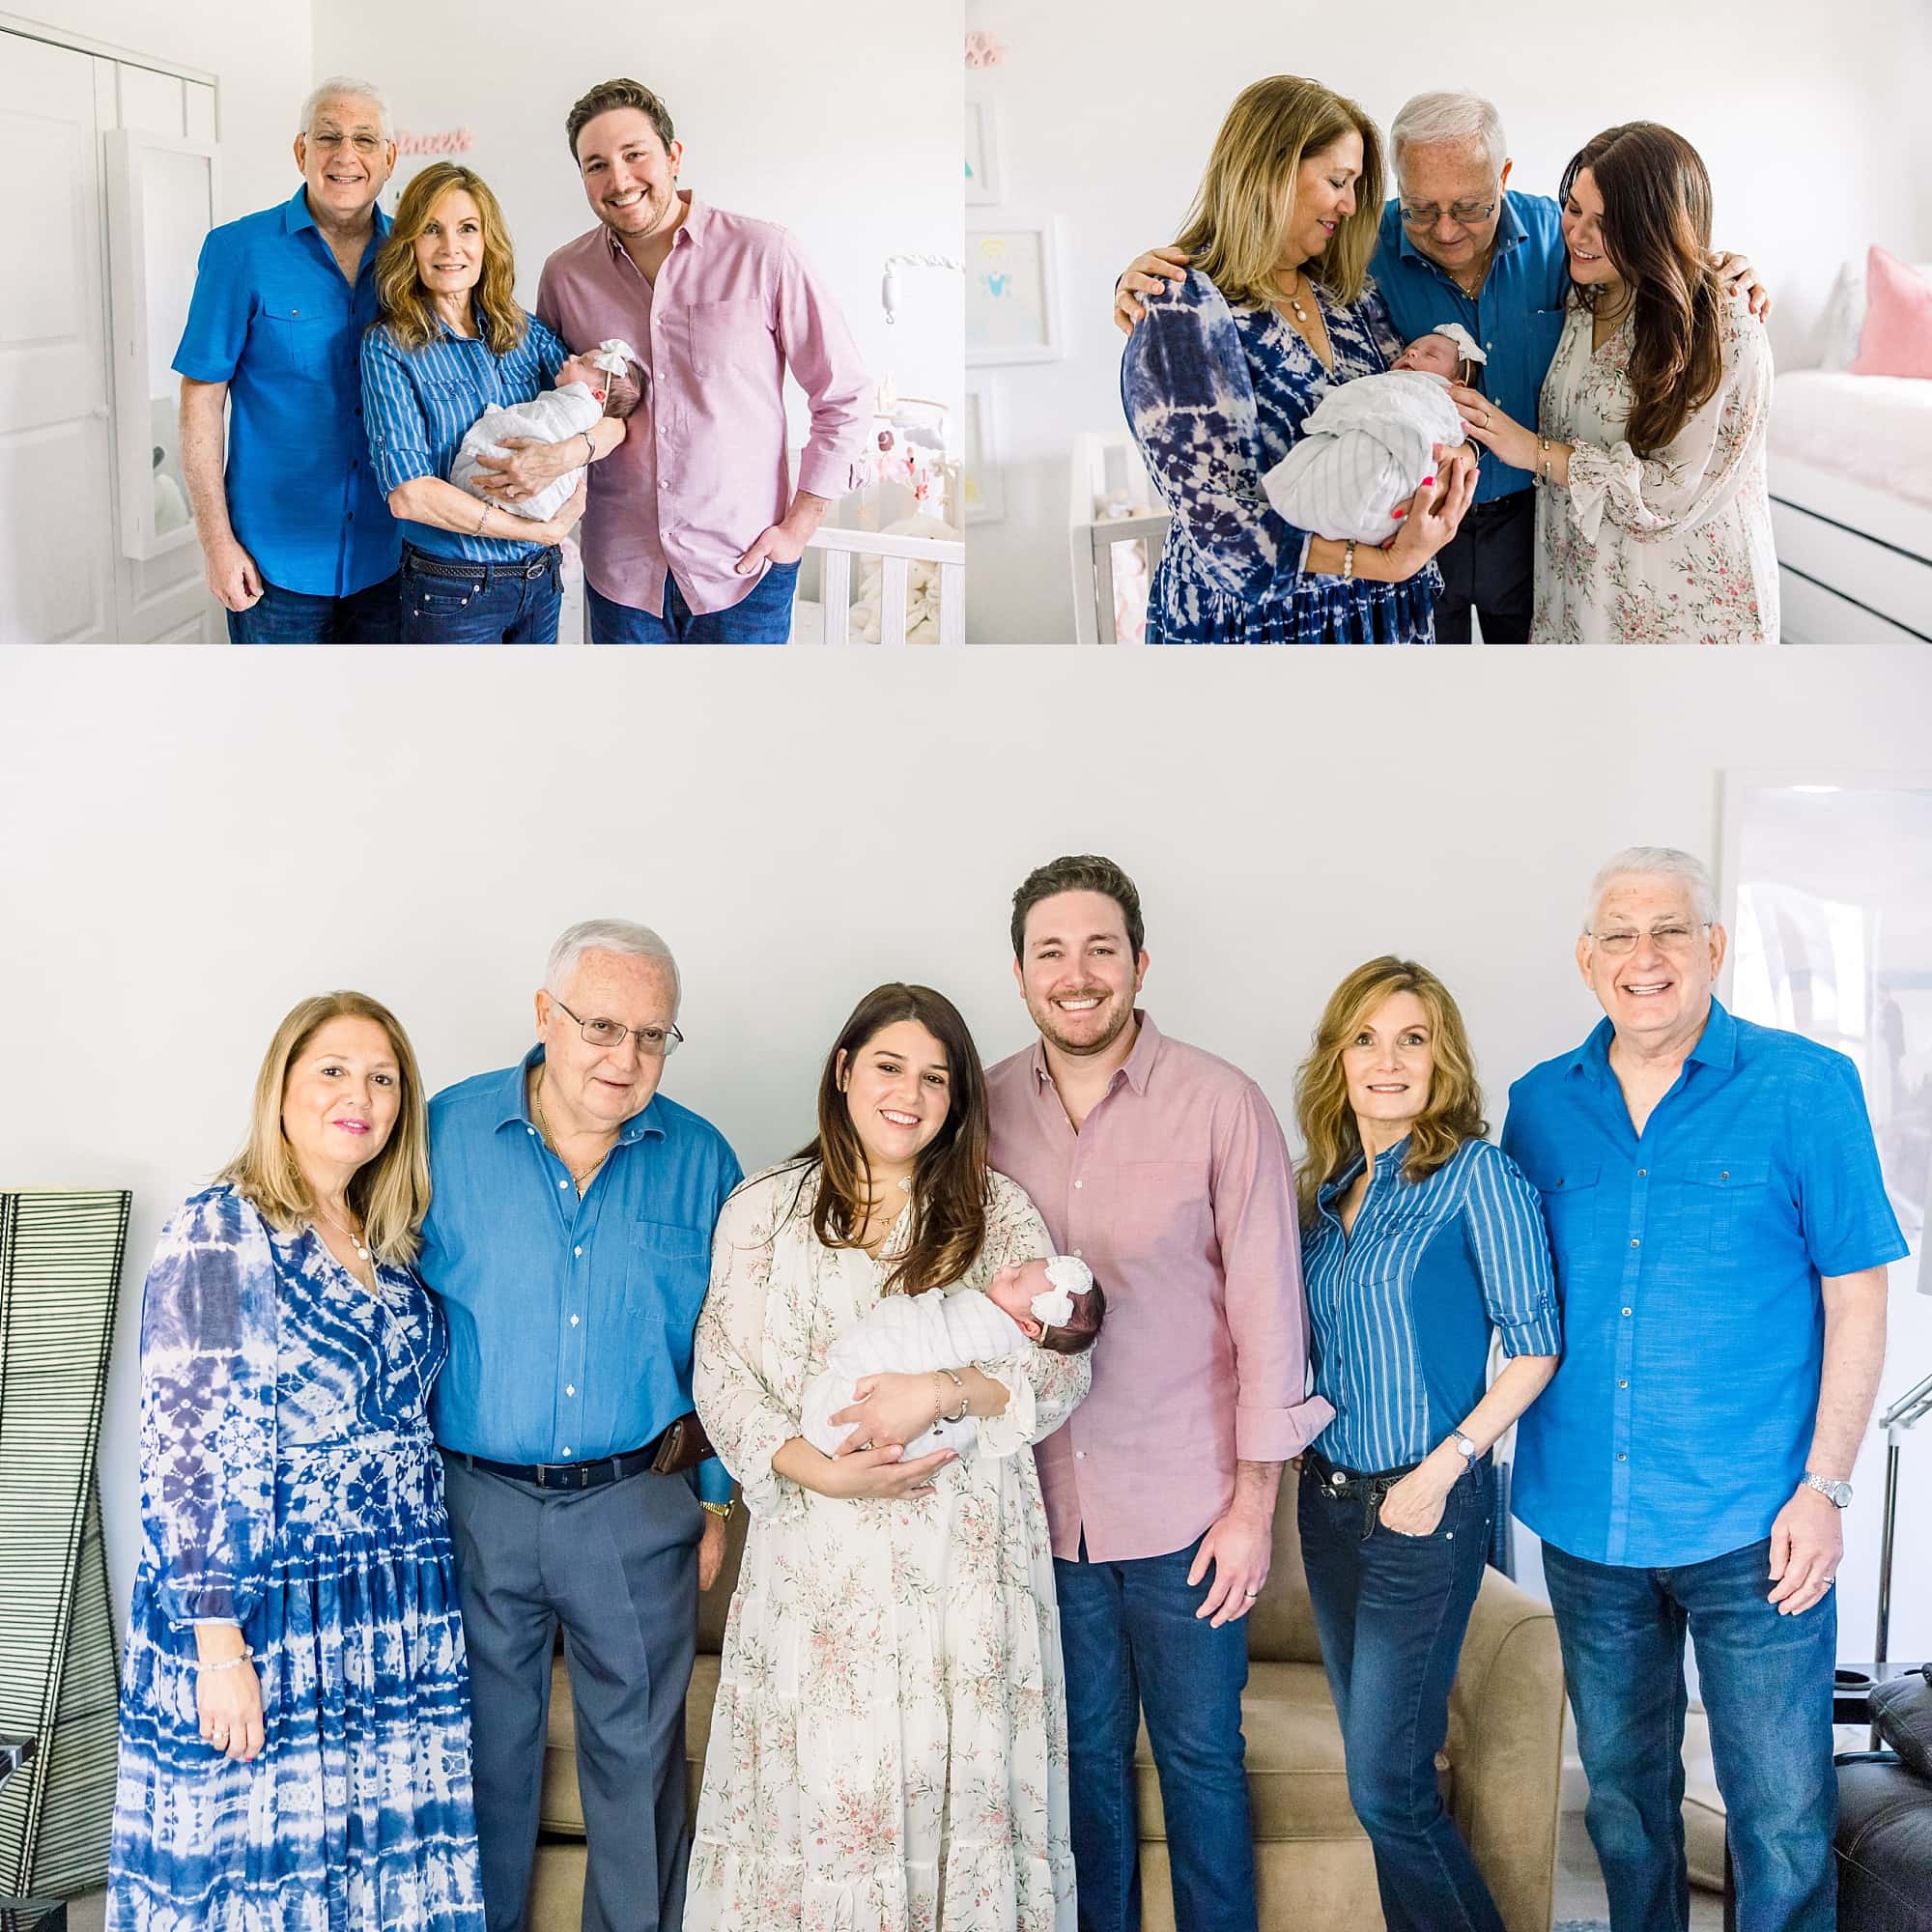 Family portraits with newborn in South Florida home to welcome new baby 